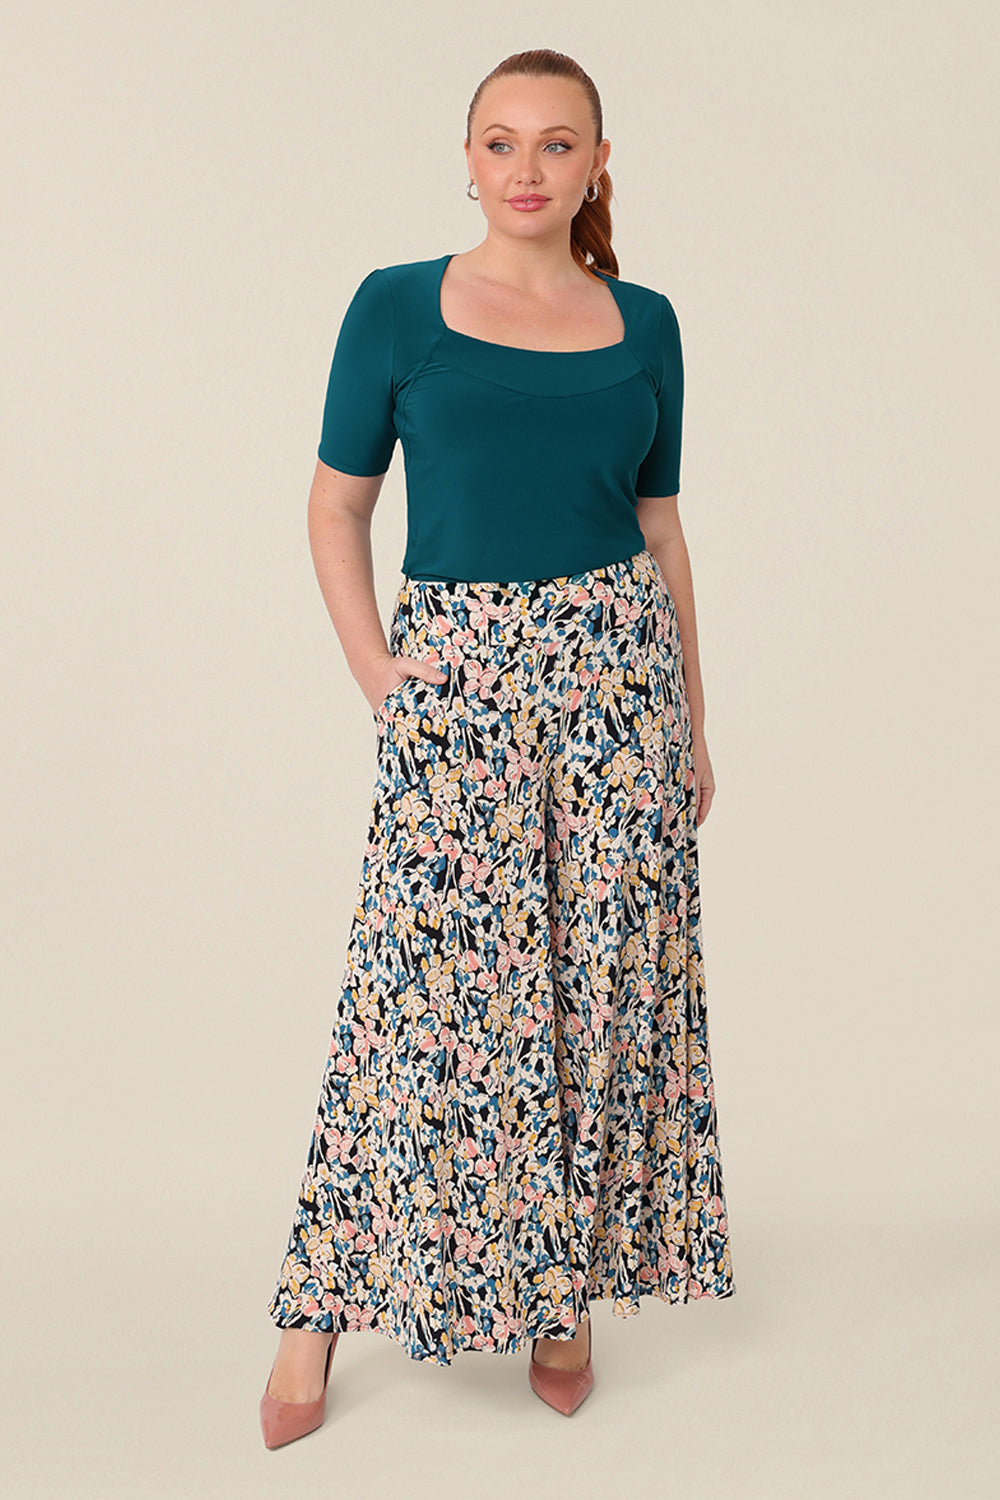 A curvy size, size 12 woman wears printed wide leg pants with pockets with a square neck dark teal top. These pull-on, easy care pants are comfortable for your everyday workwear capsule wardrobe. Shop these Australian-made wide leg trousers online in sizes 8 to 24, petite to plus sizes.